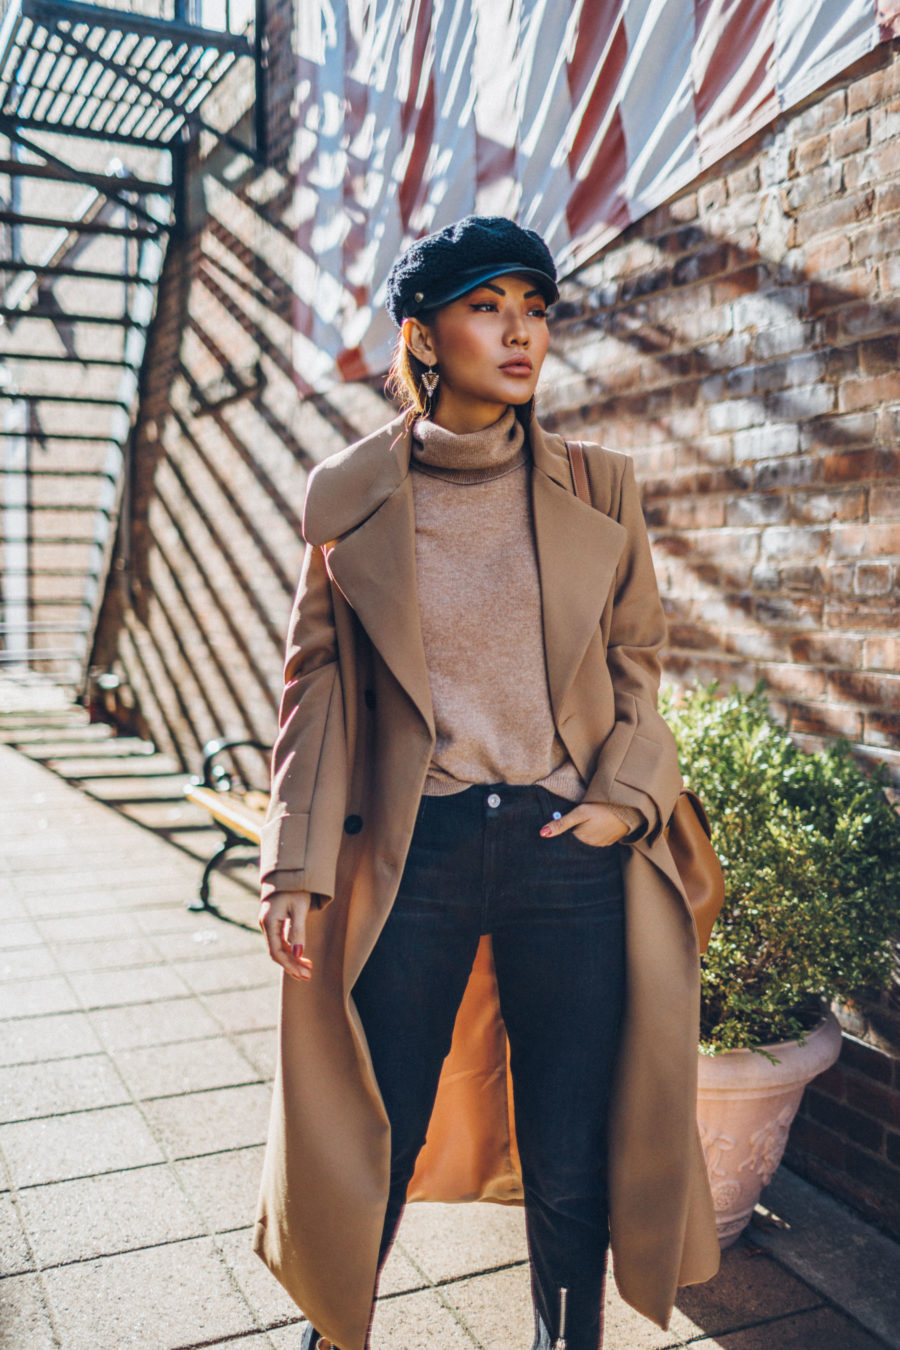 How to Buy an Investment Coat - Belted Camel Coat with Dark Denim Baker Boy Cap and Satchel // Notjessfashion.com